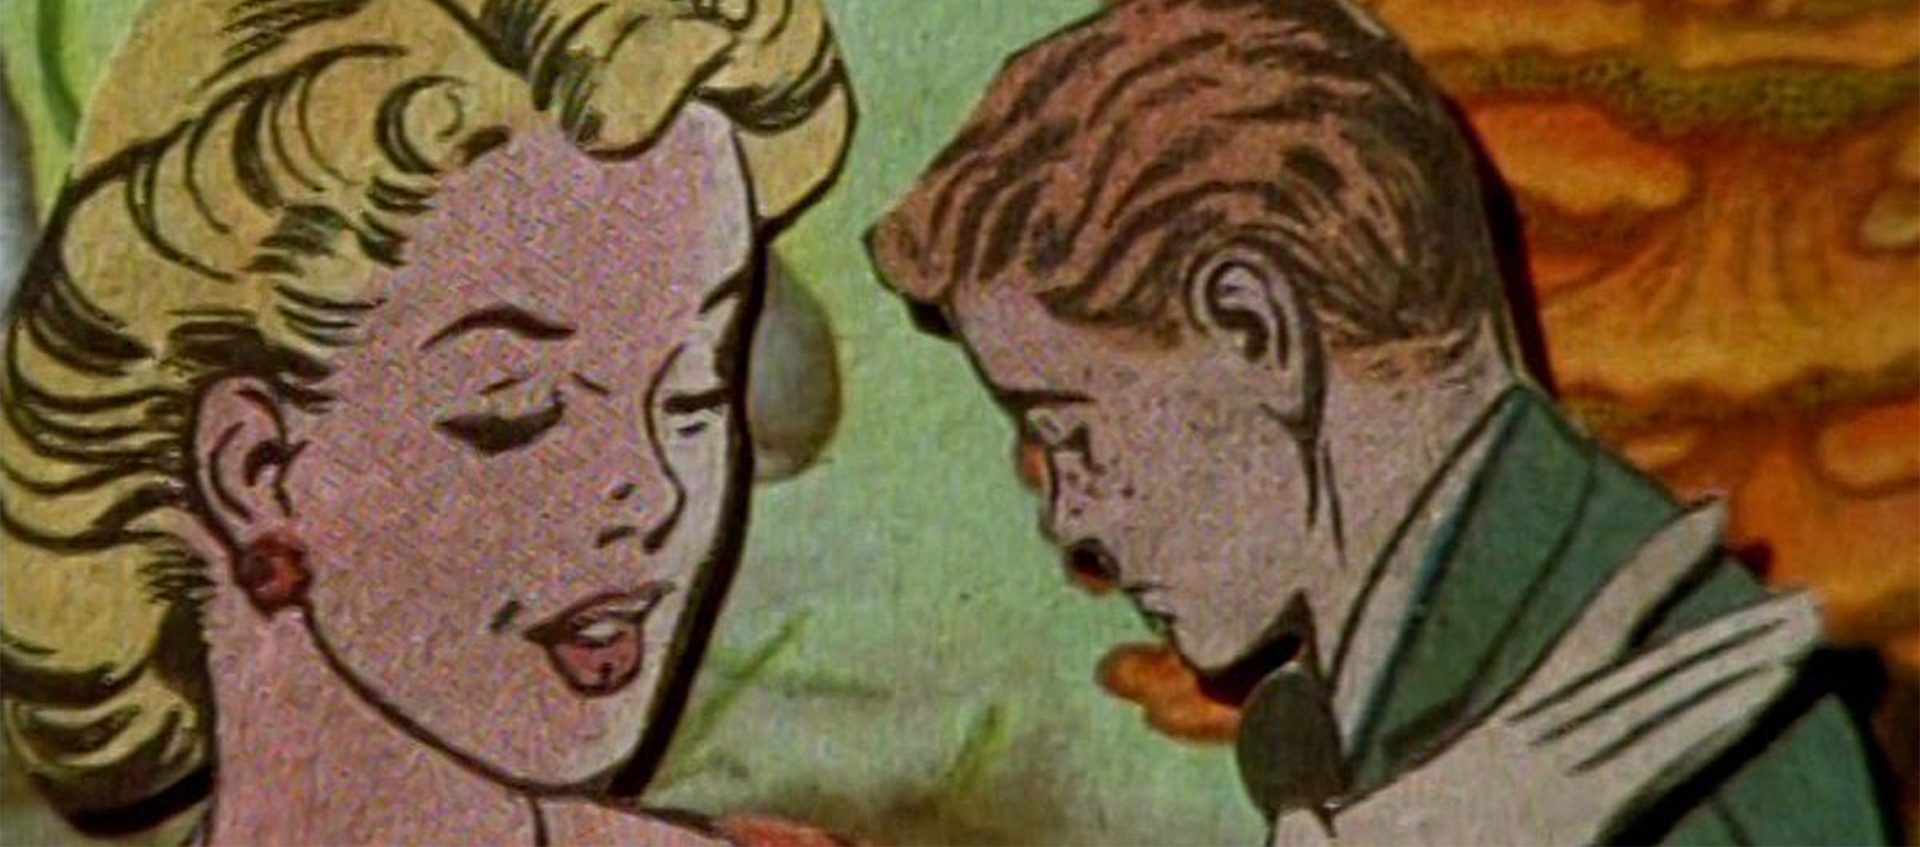 Female and male vintage comic book characters in a scene from collage animator Lewis Klahr's film Pony Glass